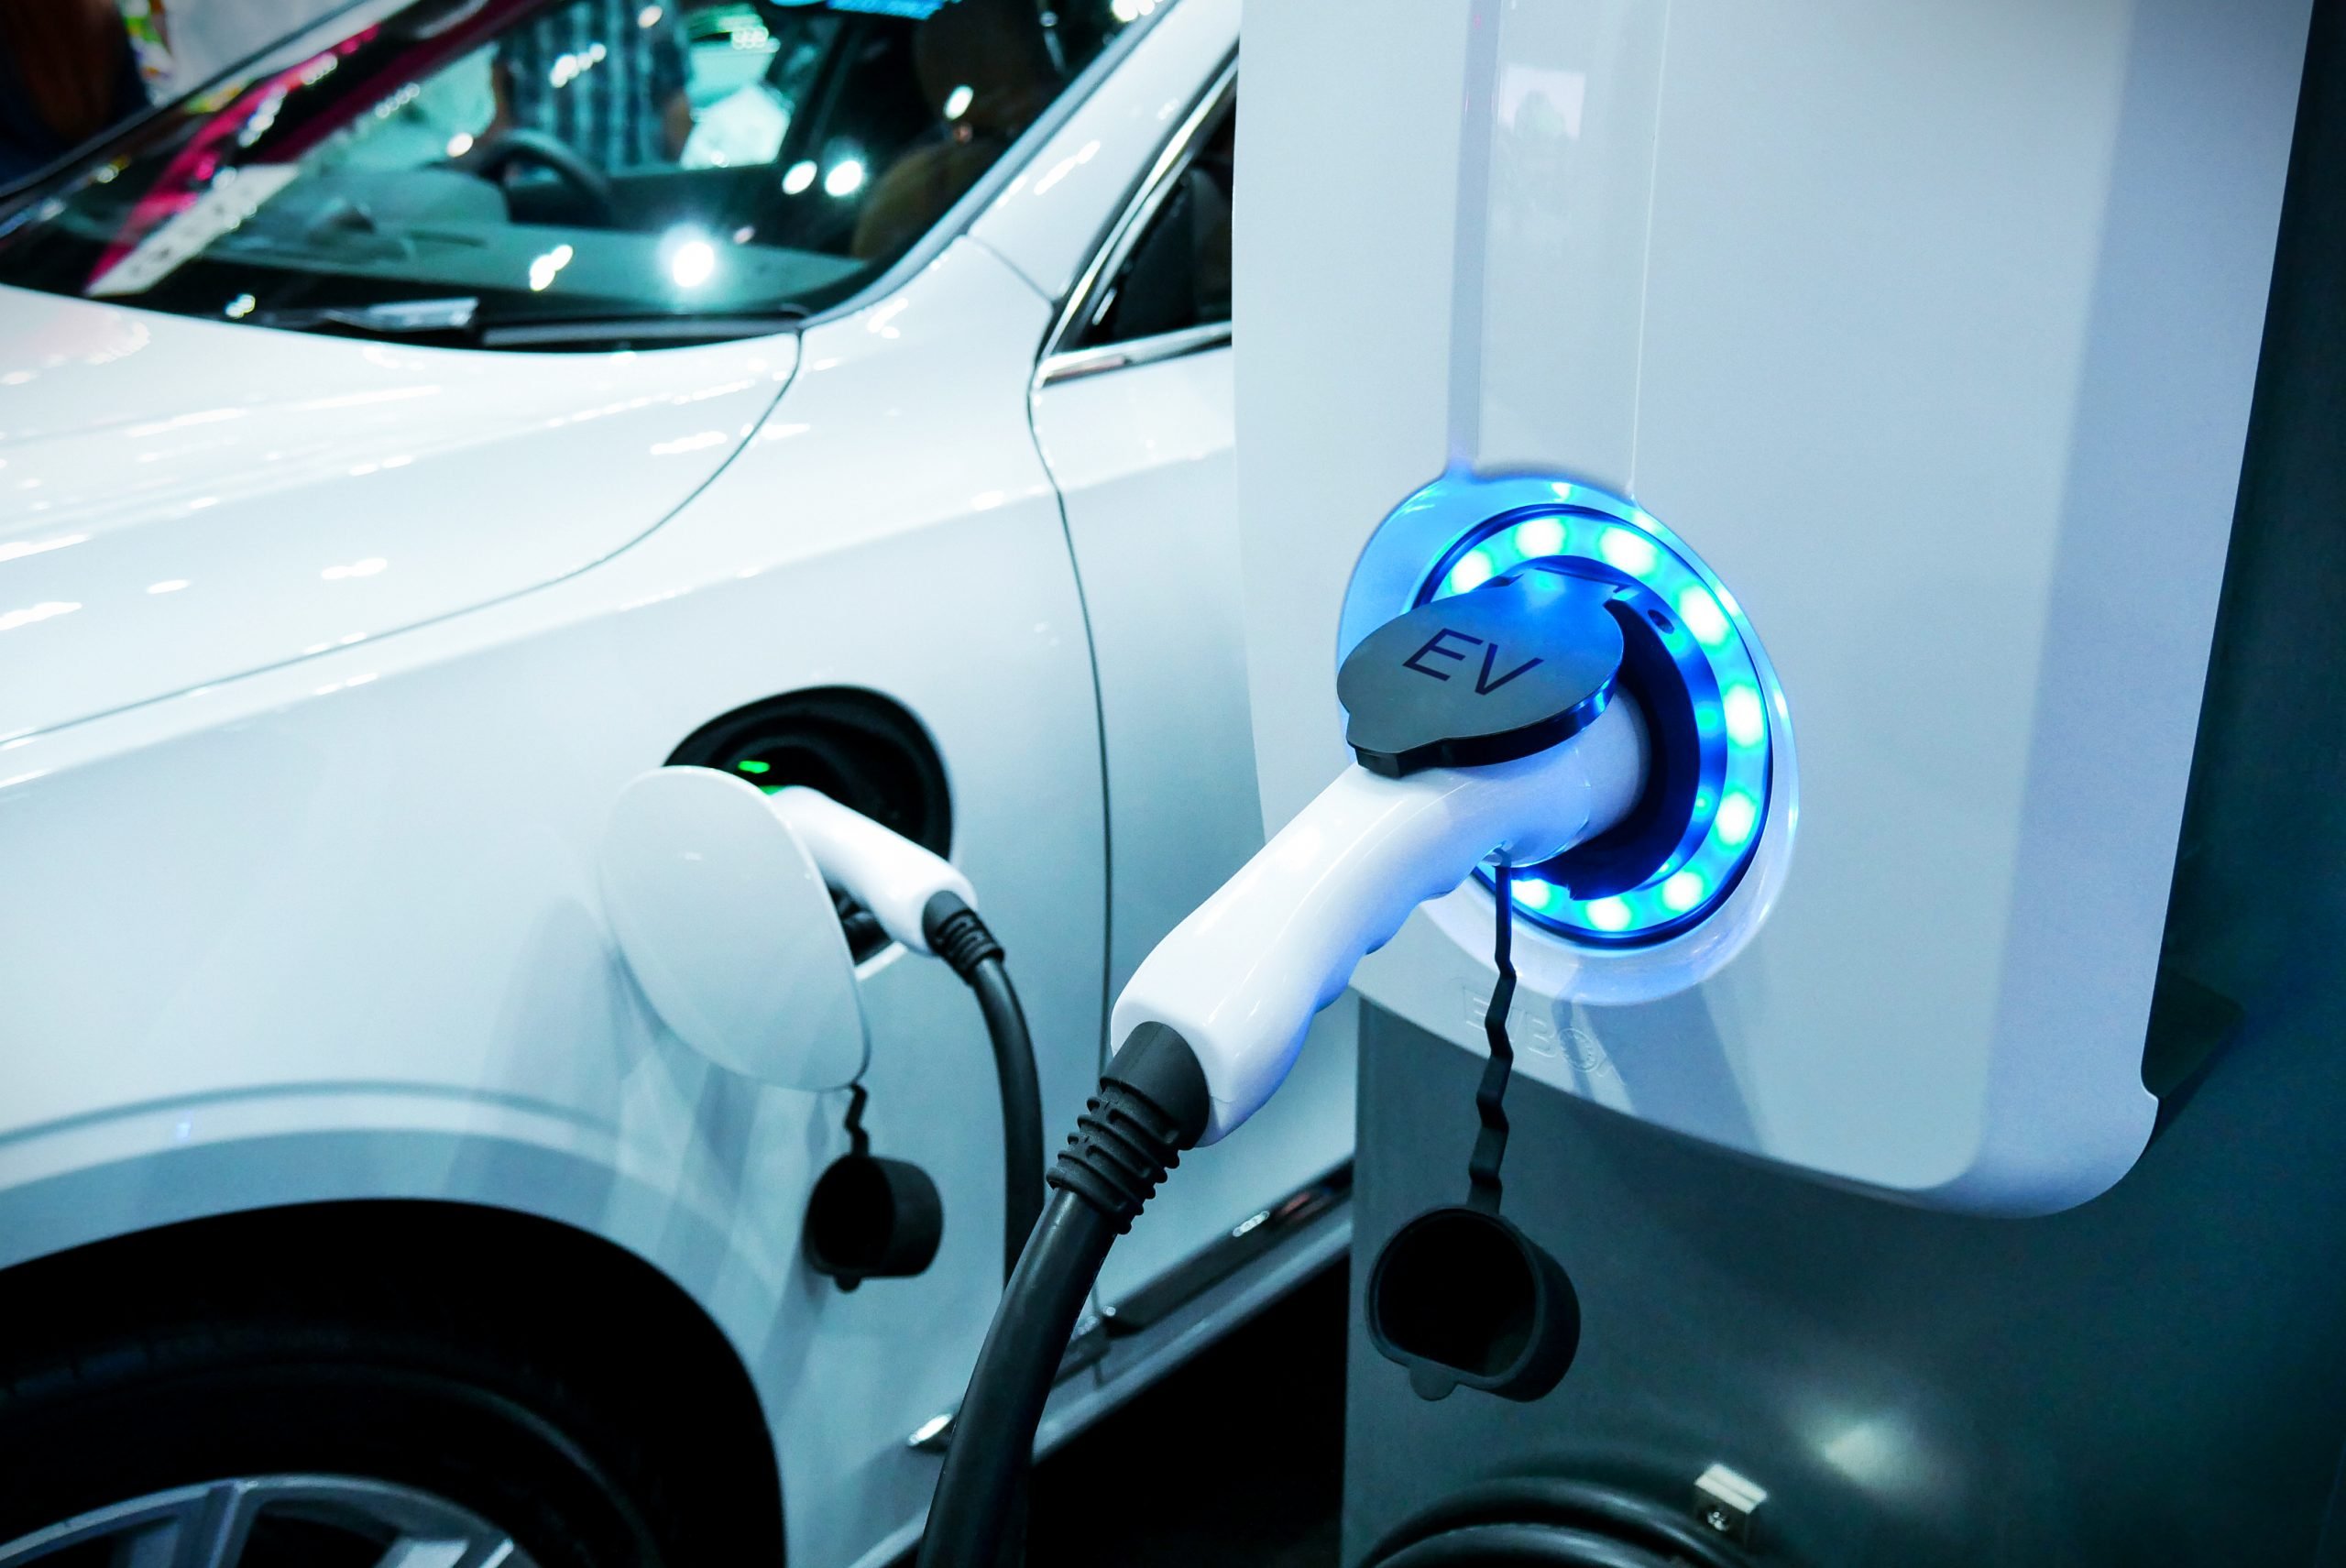 The electric car is having a hard time, too expensive to purchase and use